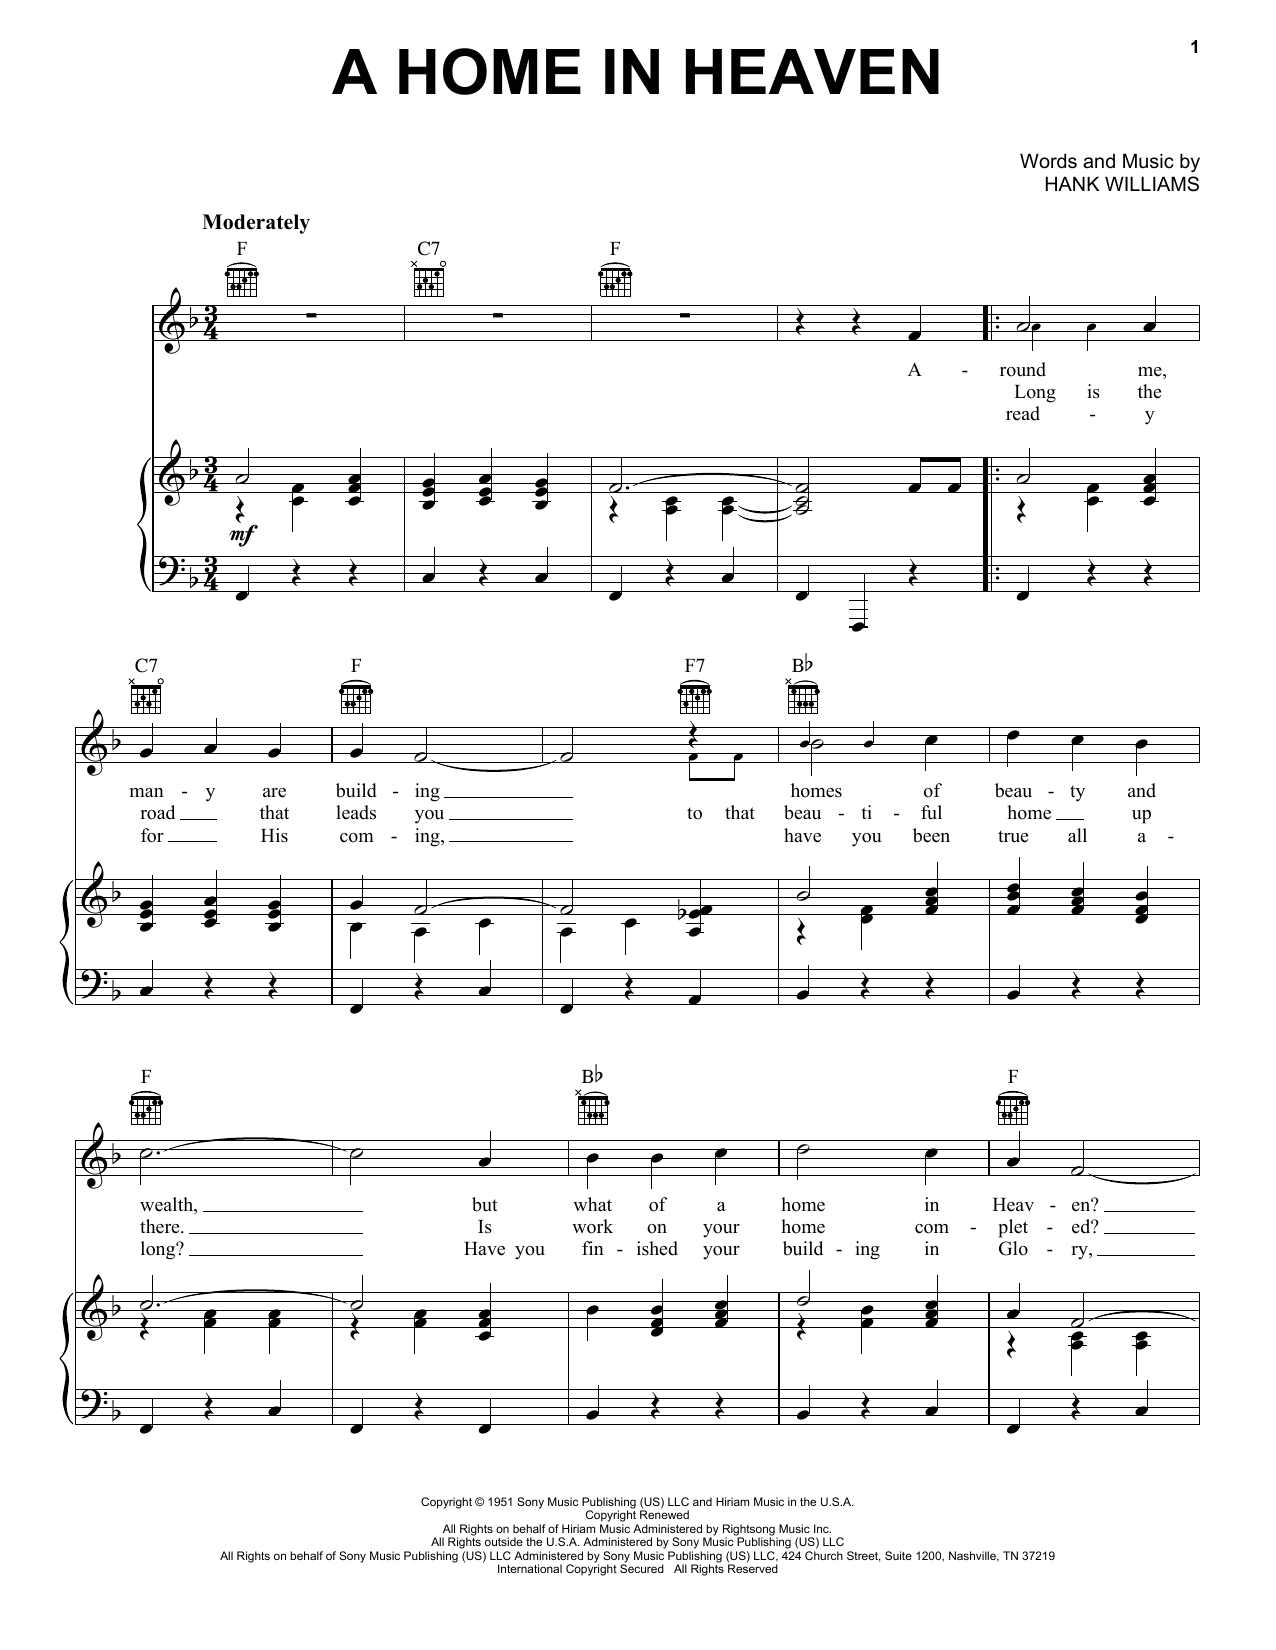 Hank Williams A Home In Heaven sheet music notes printable PDF score